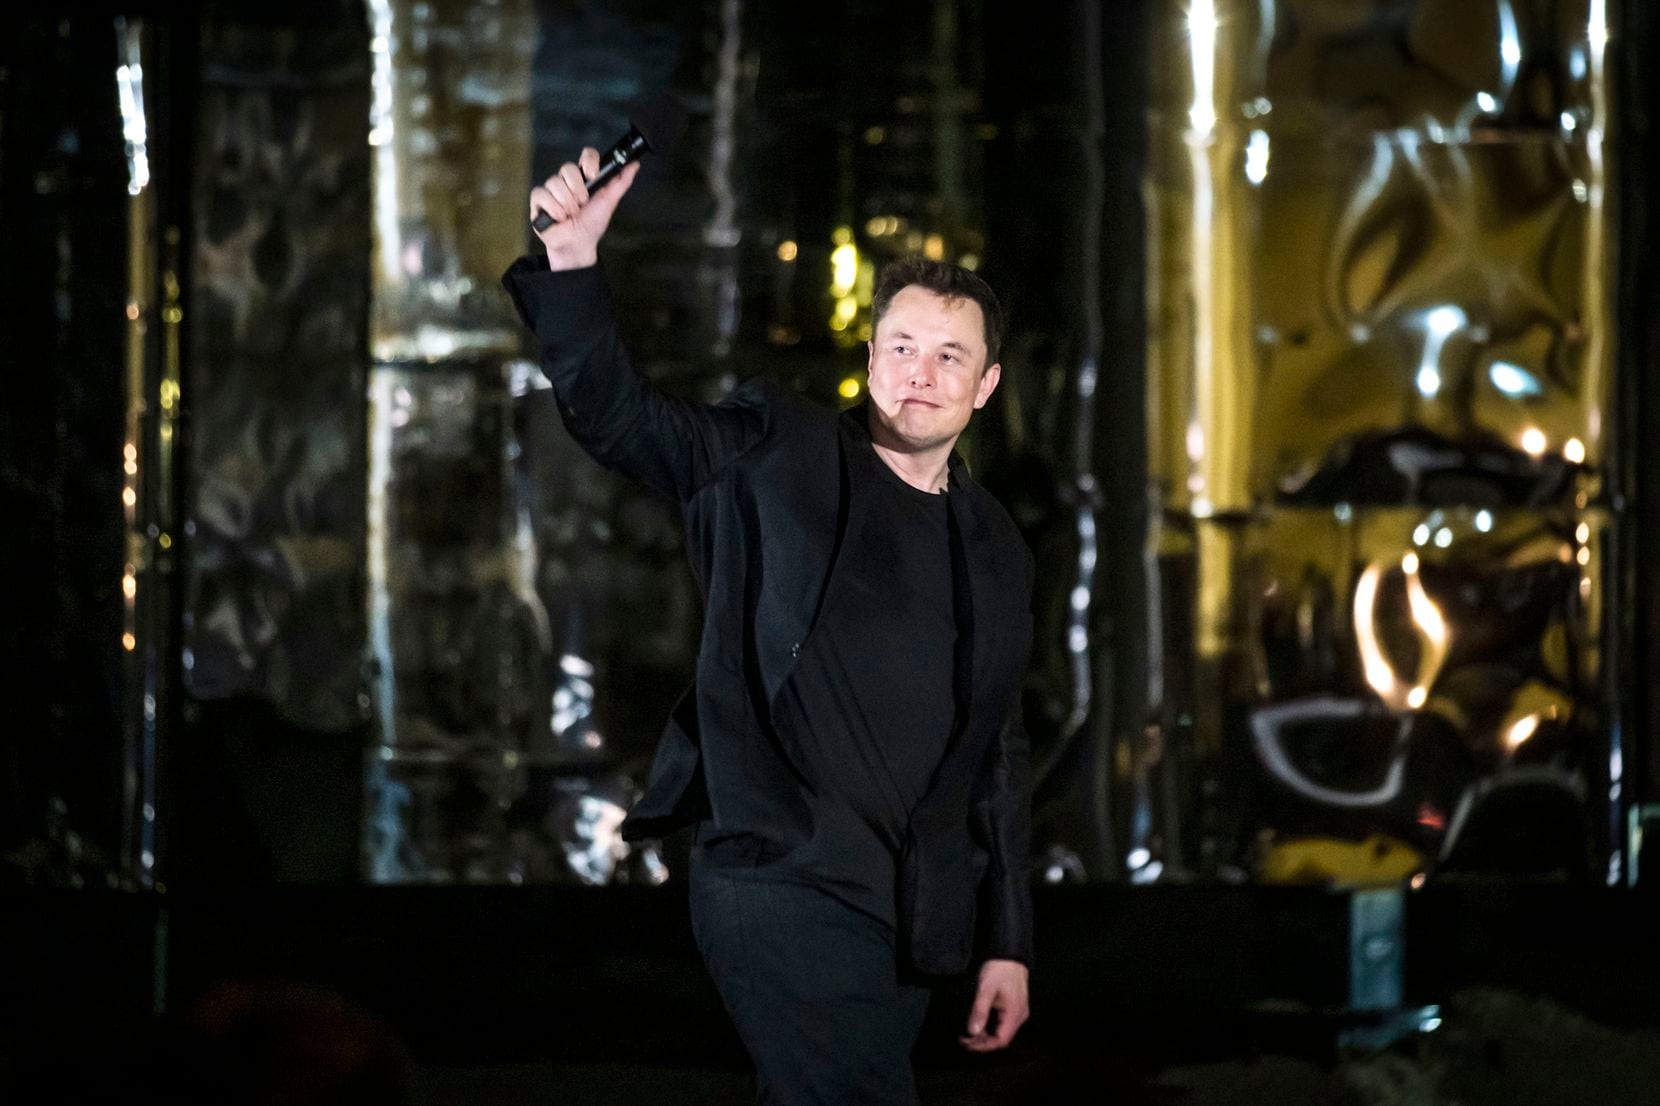 SpaceX founder Elon Musk makes a presentation in front of a prototype of the Starship...